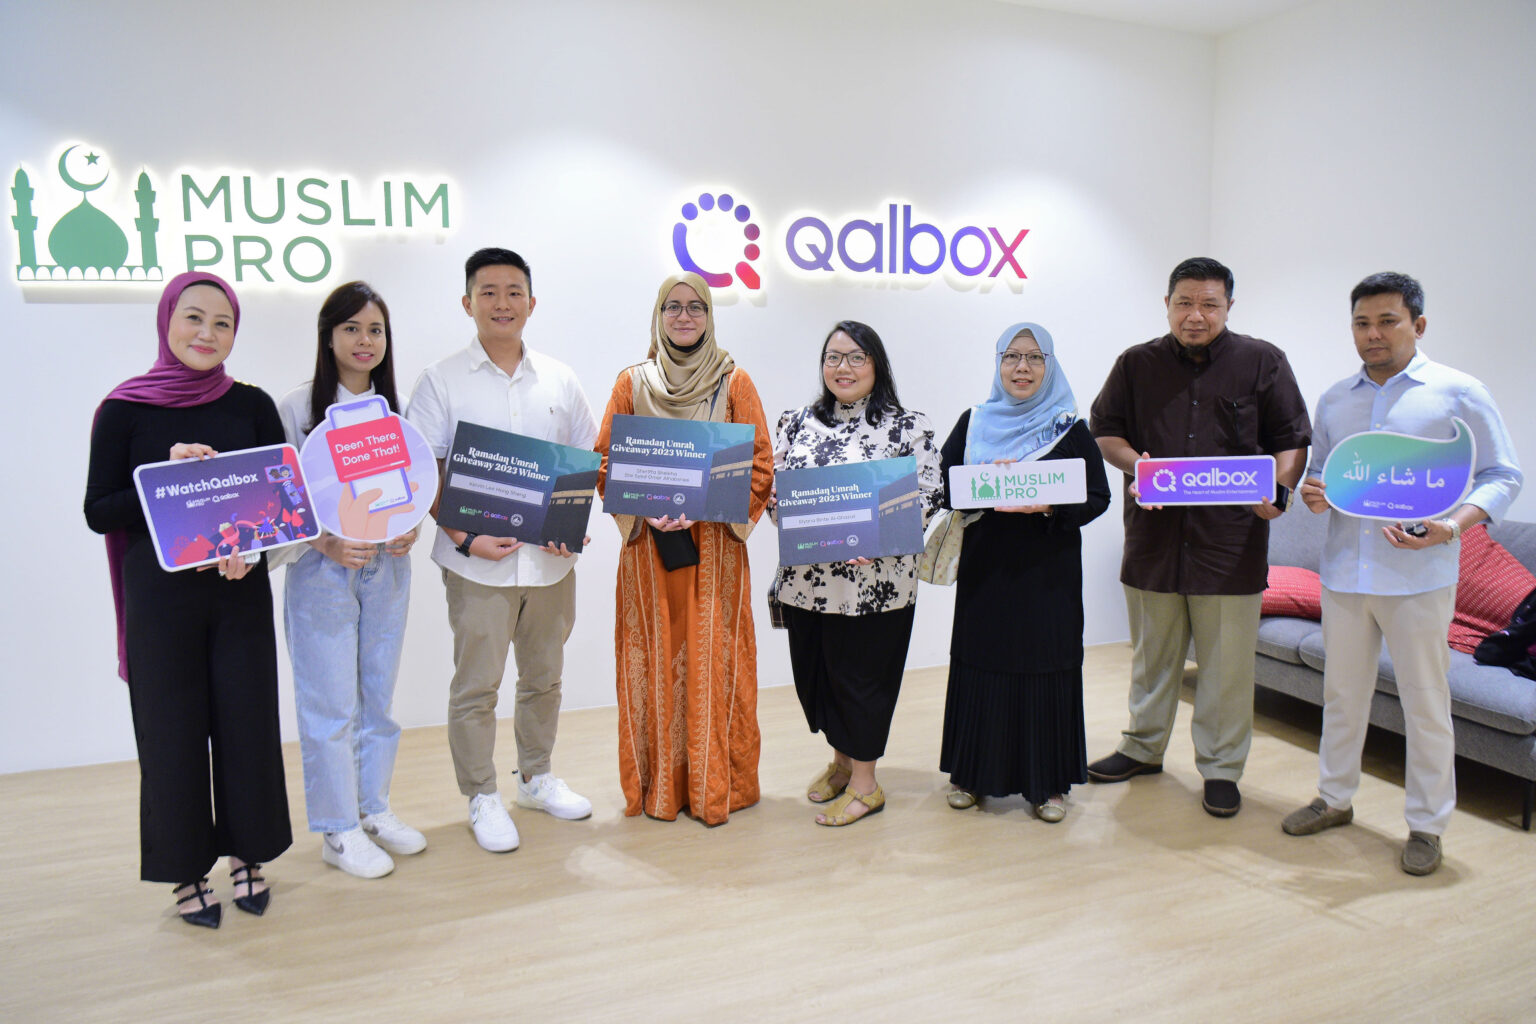 Singapore-based global app Muslim Pro announces significant milestone with 150 million downloads worldwide